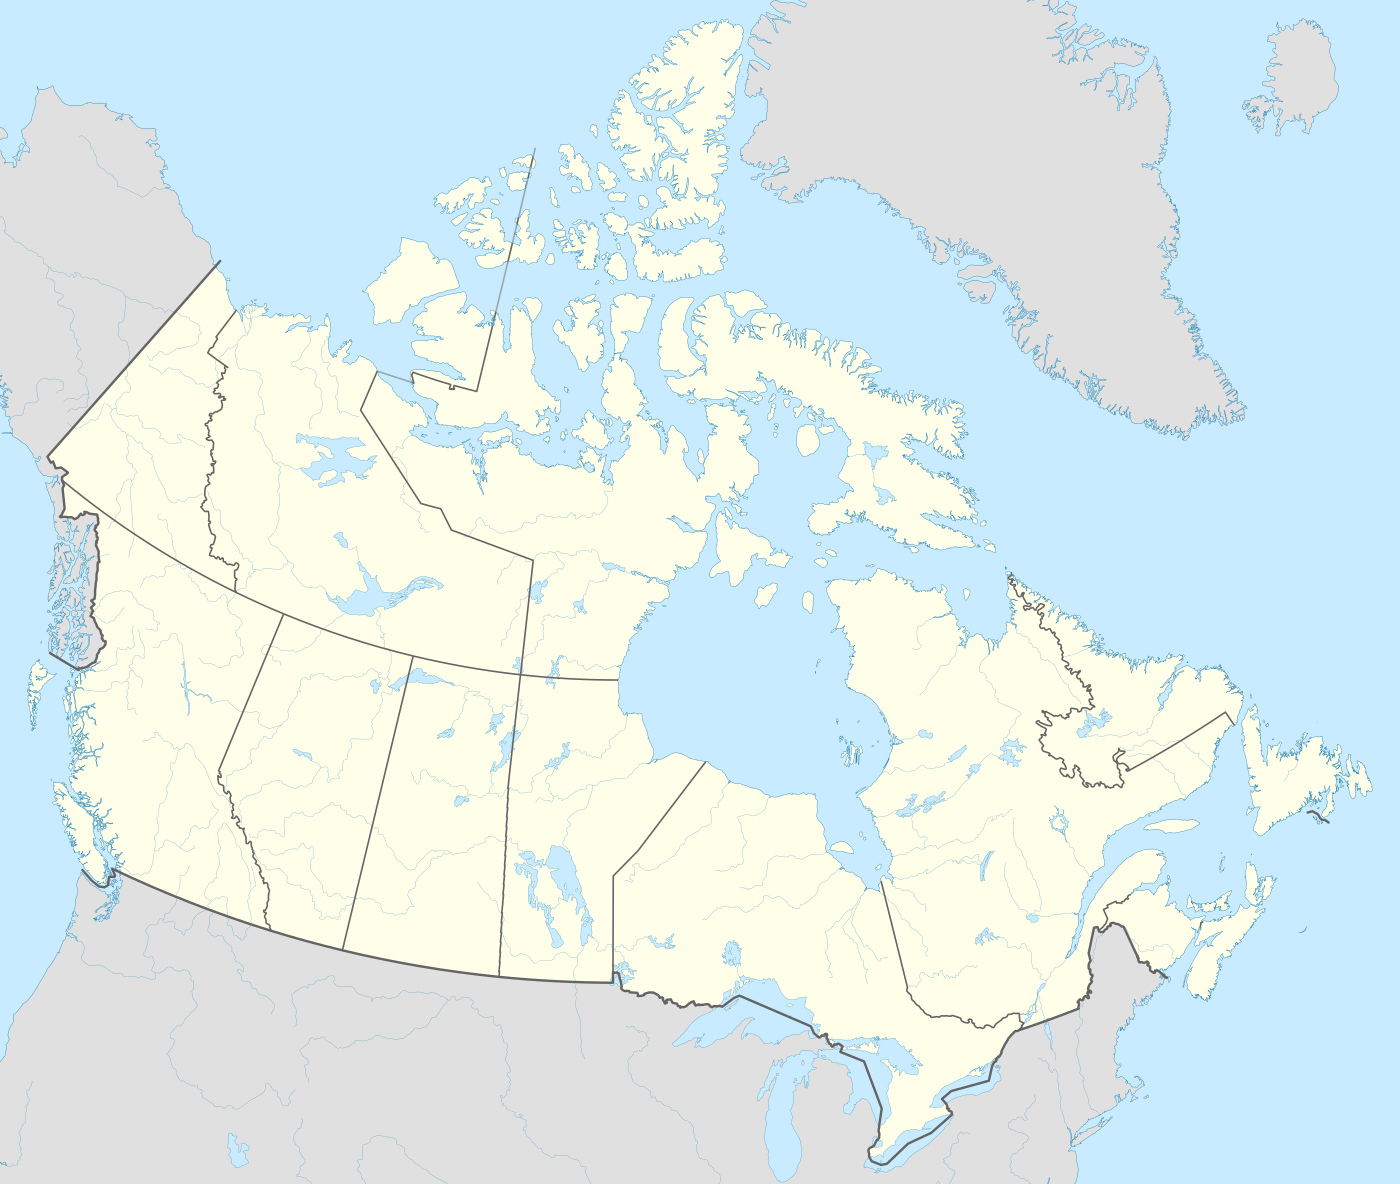 Canada Games is located in Canada